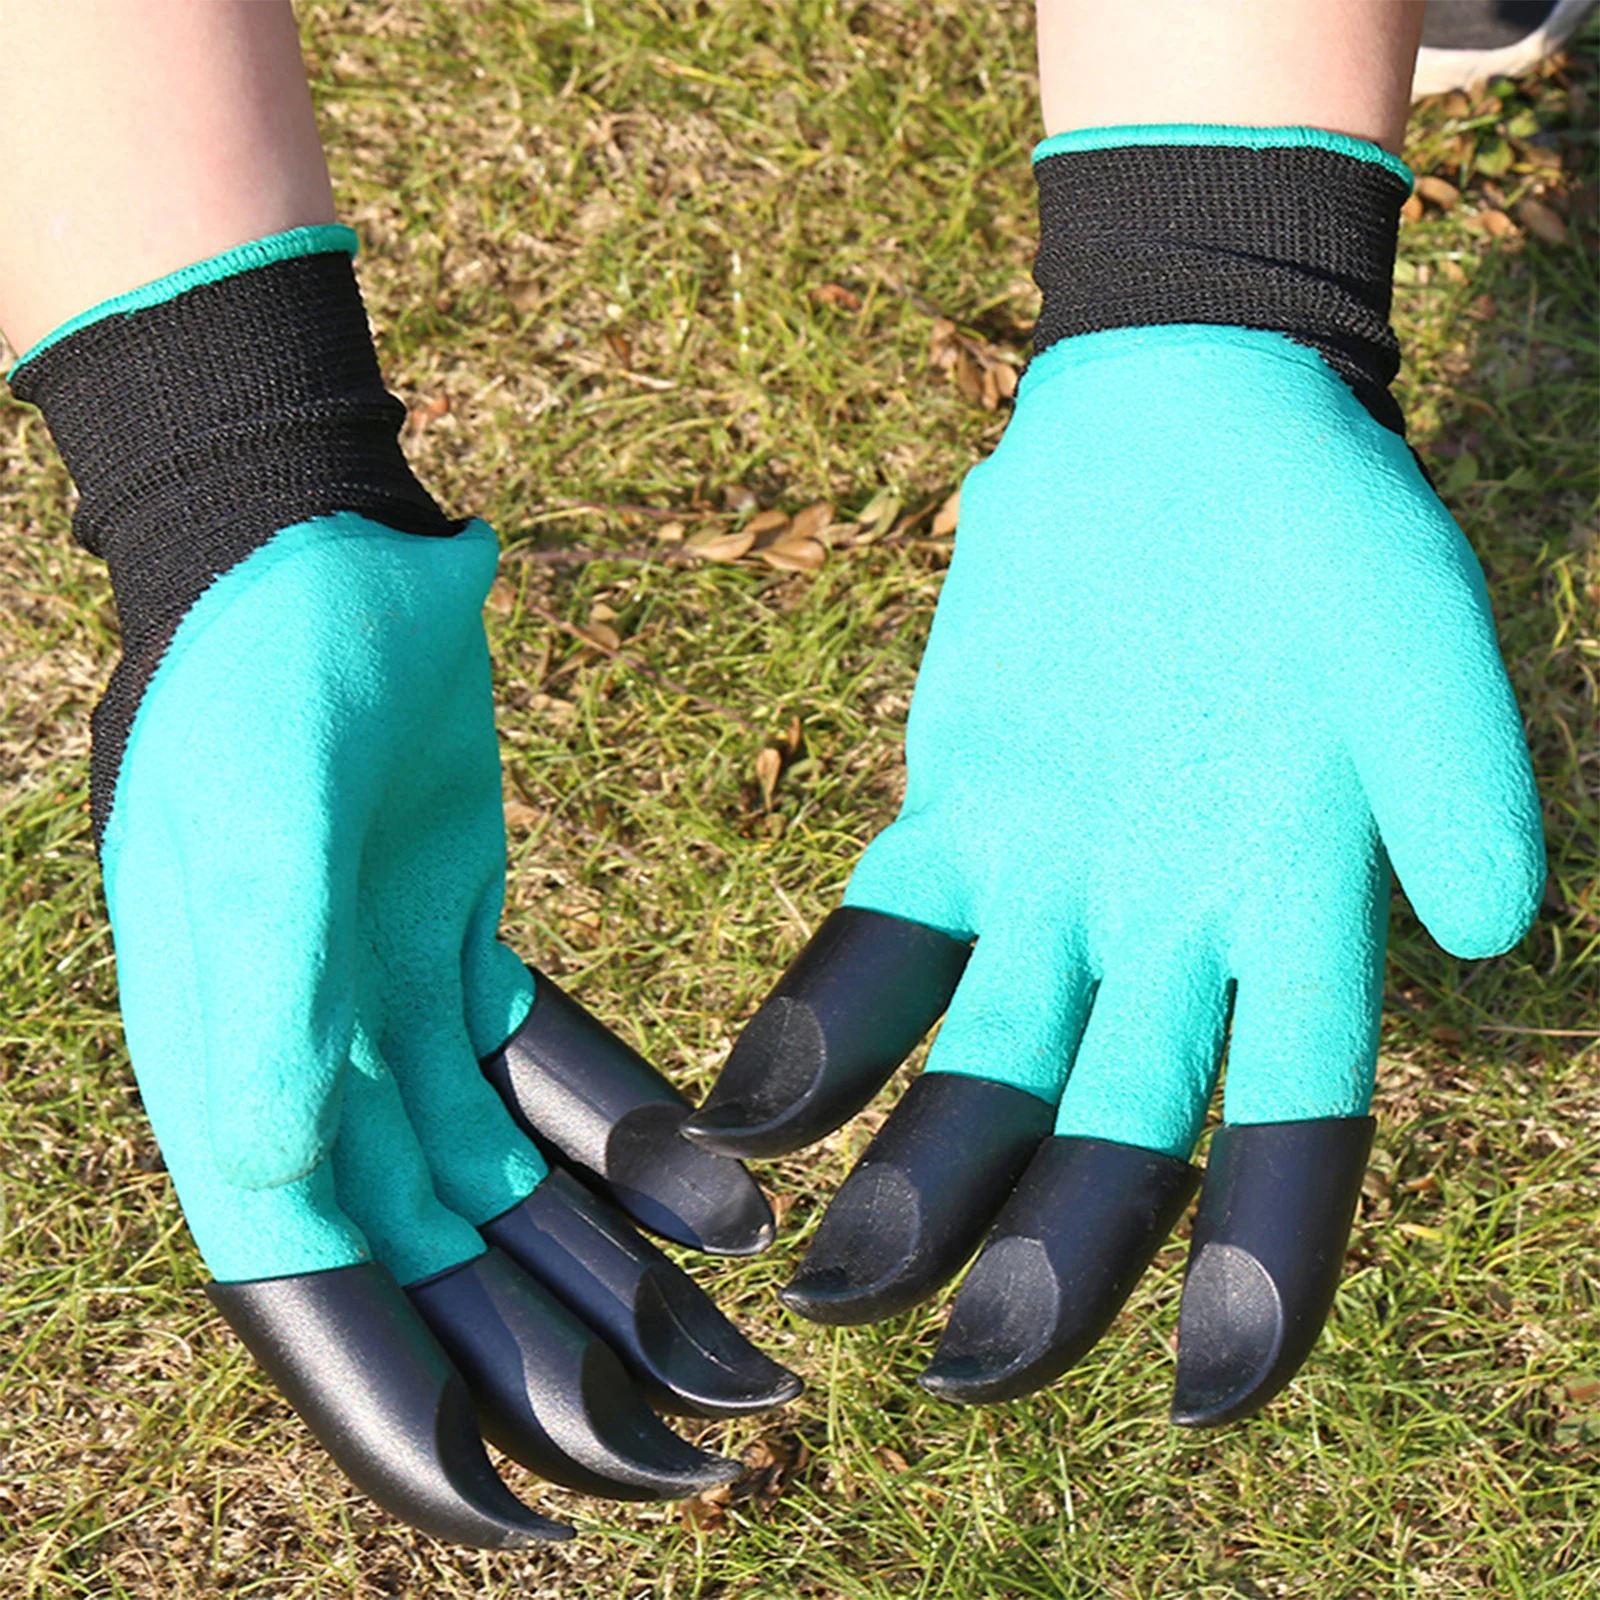 

Garden Gloves with Single/Double Fingertips Claws Waterproof Gardening Working Gloves for Digging Planting Weeding Seed